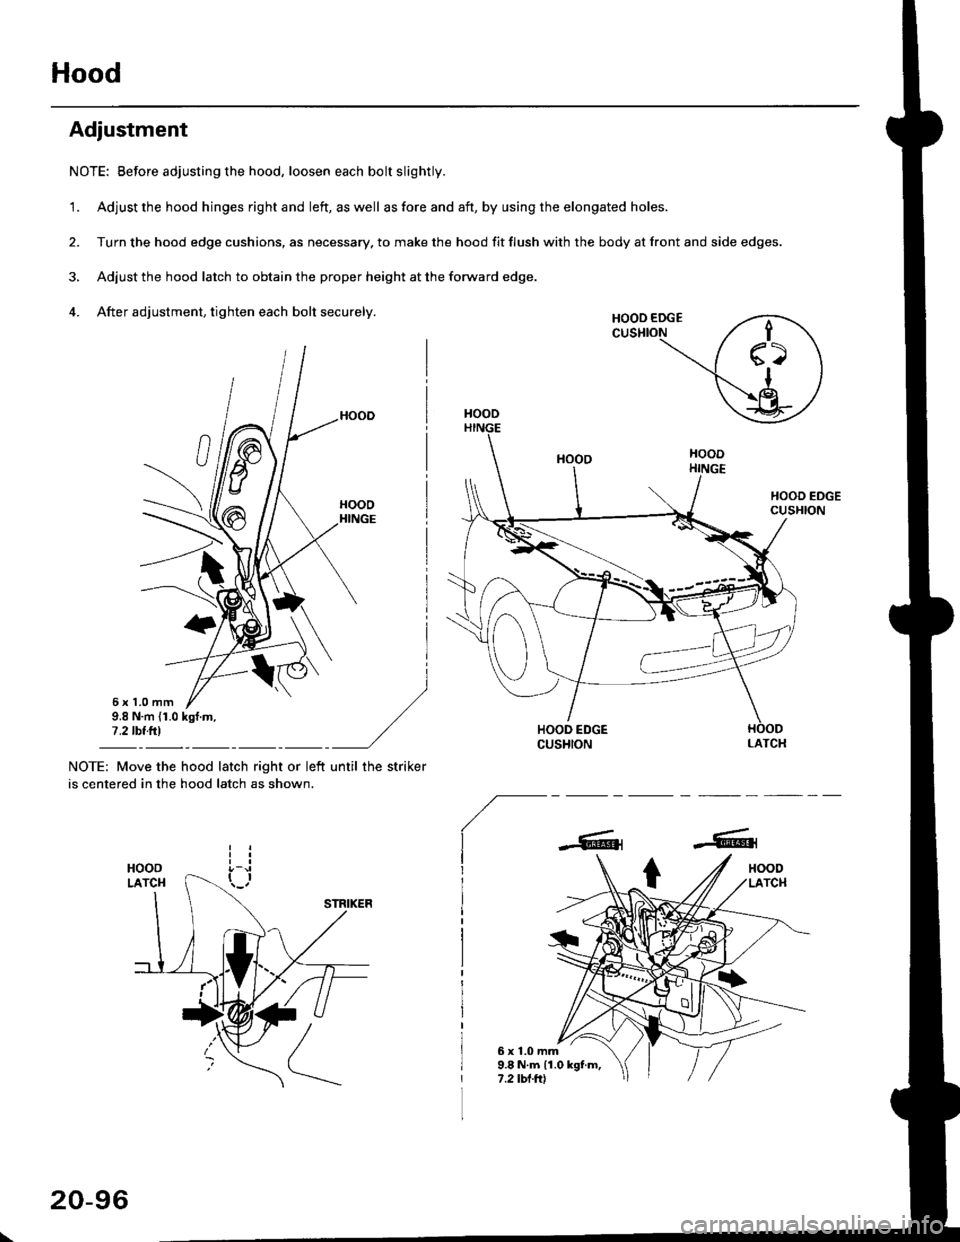 HONDA CIVIC 1998 6.G Workshop Manual Hood
Adjustment
NOTE: Before adjusting the hood, loosen each bolt slightly.
1. Adjust the hood hinges right and left, as well as fore and aft, by using the elongated holes.
2. Turn the hood edge cushi